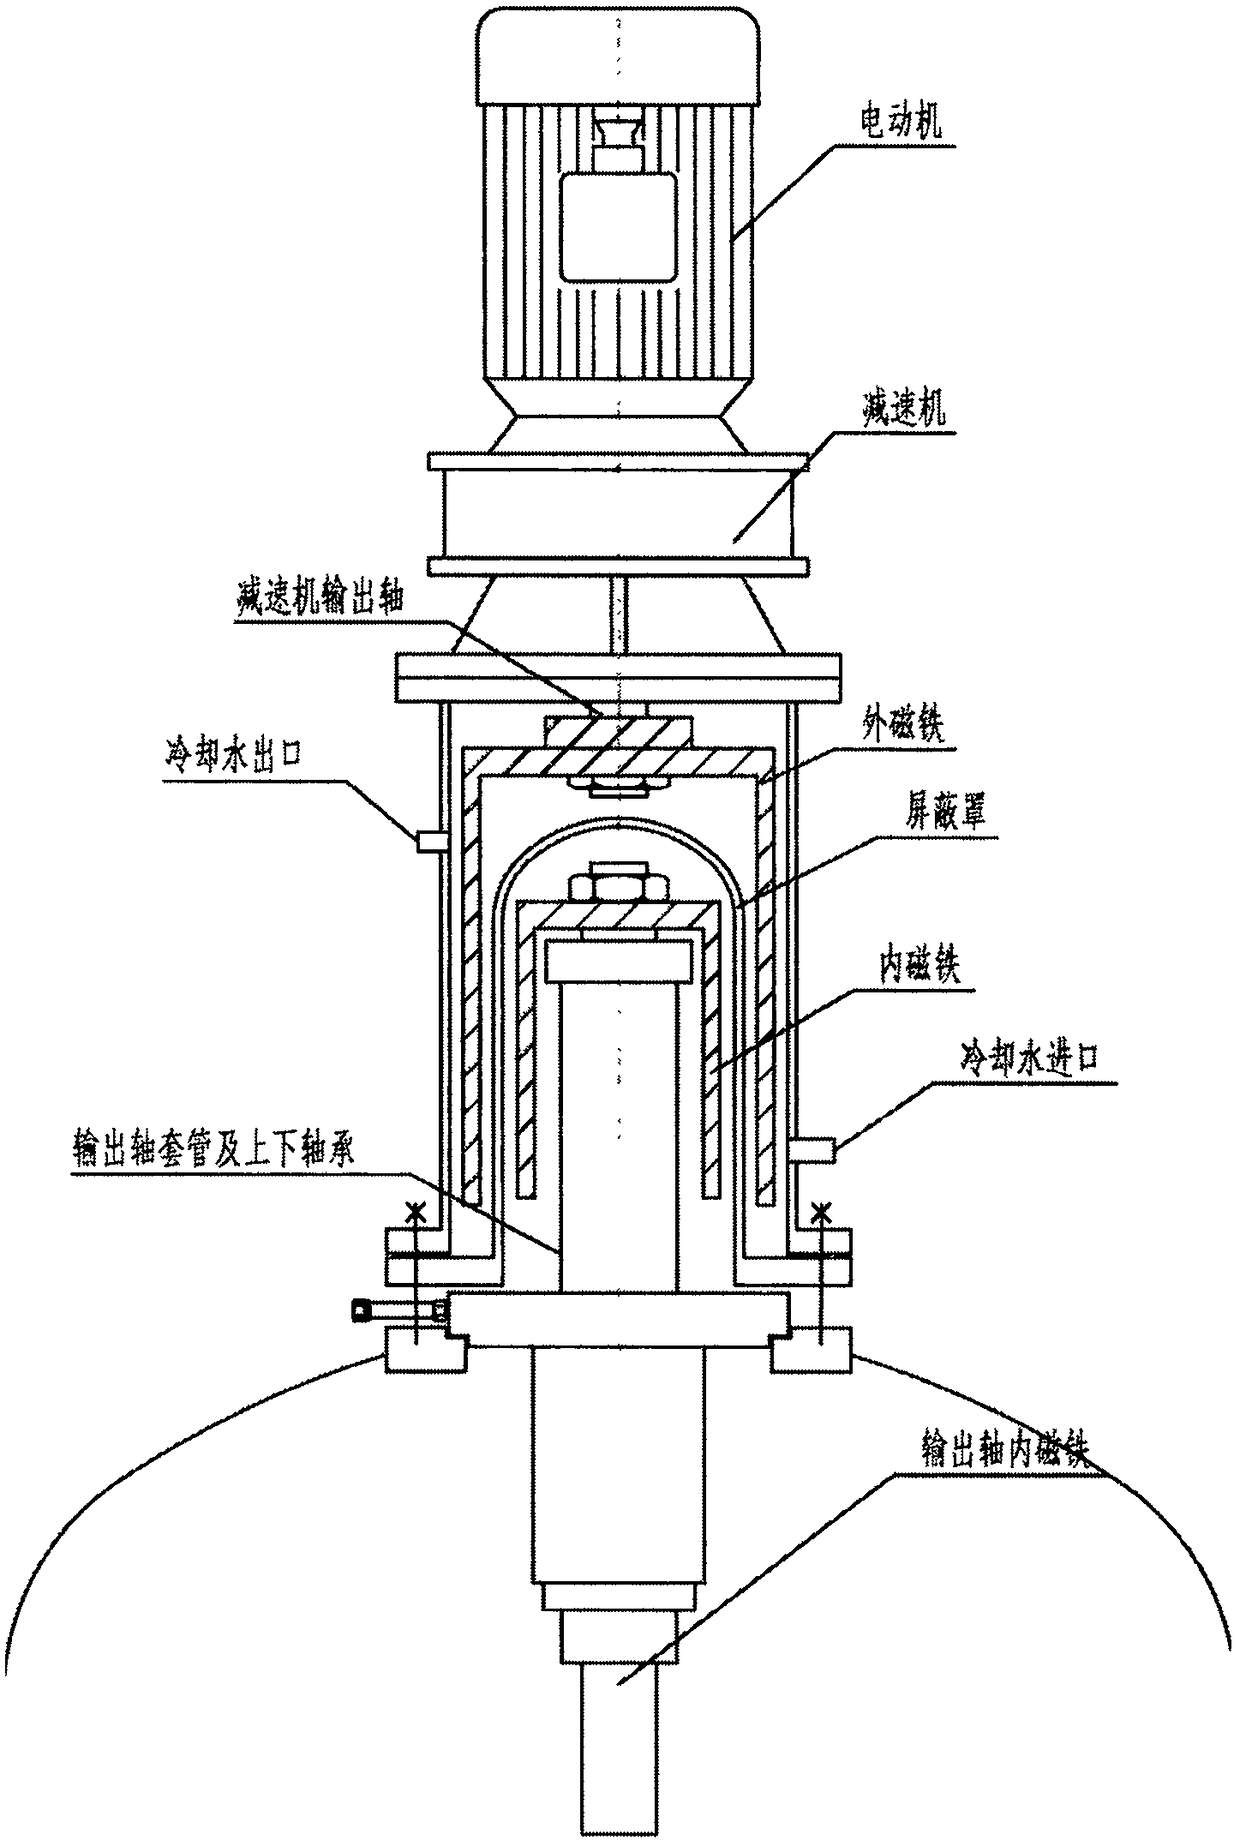 Power output equipment, hydraulic stirrer, high-pressure reaction kettle including power output equipment and hydraulic stirrer, and system